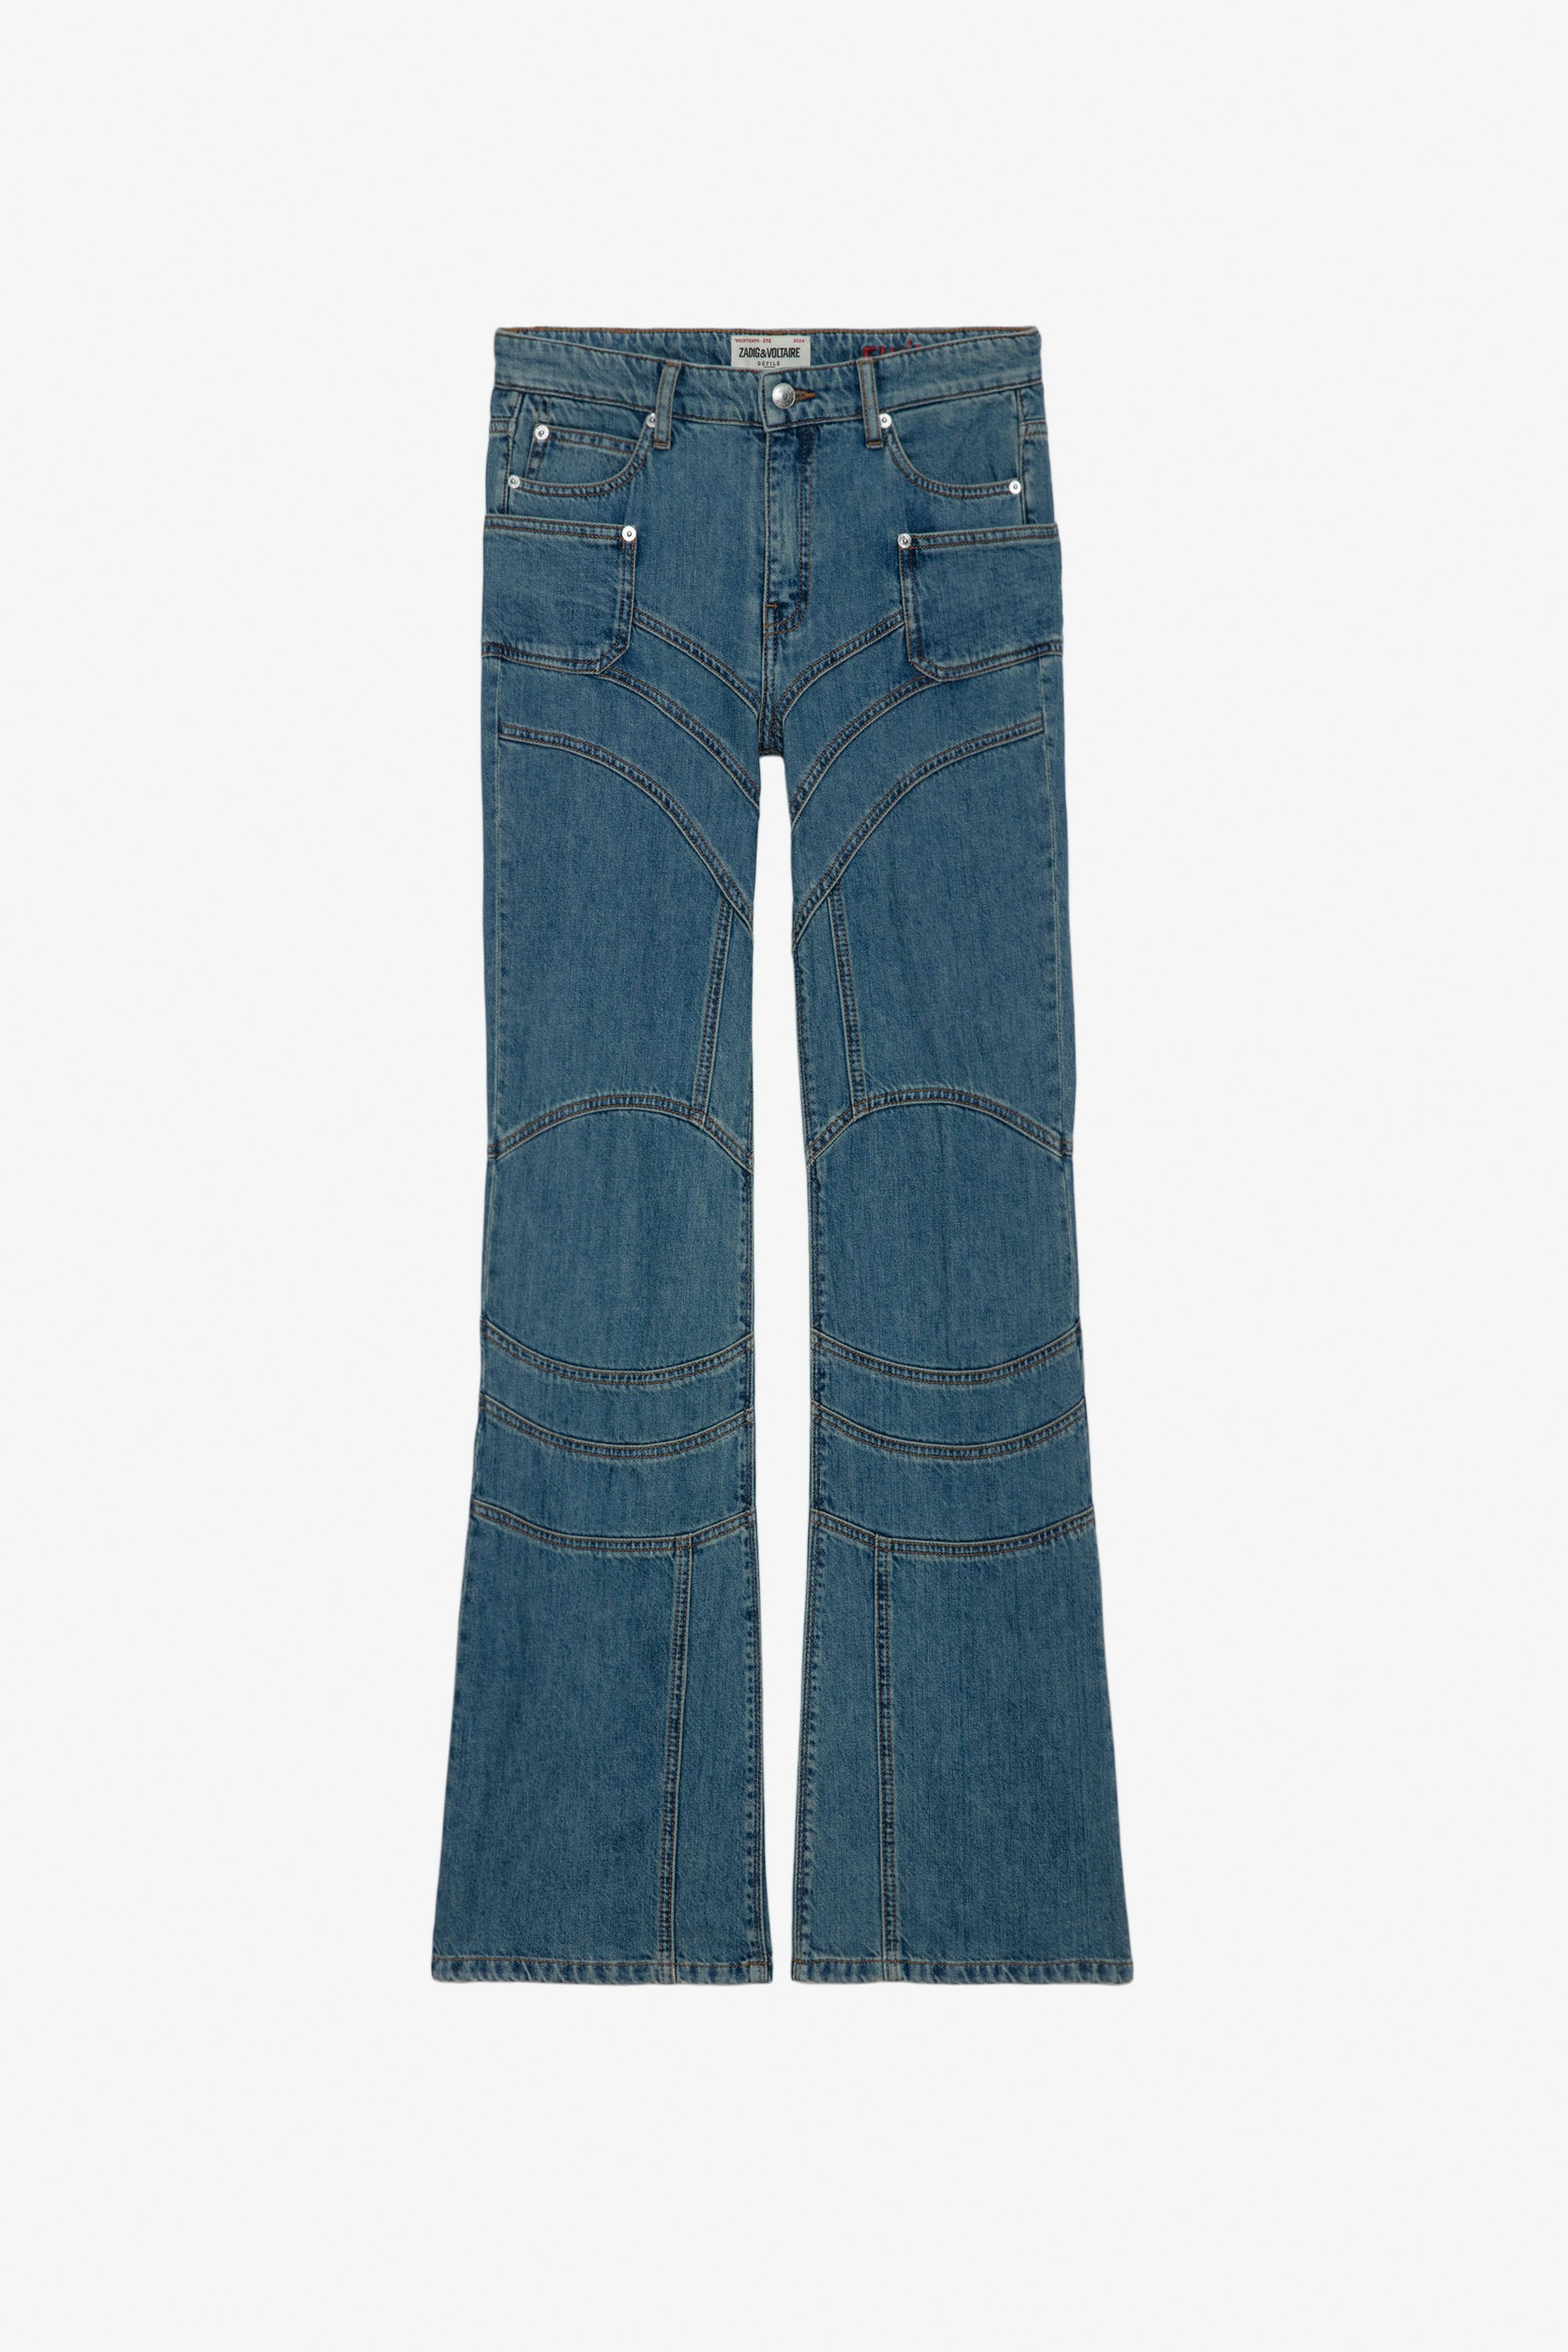 Elvira Jeans - Blue denim loose-fitting jeans with pockets and overstitched details.